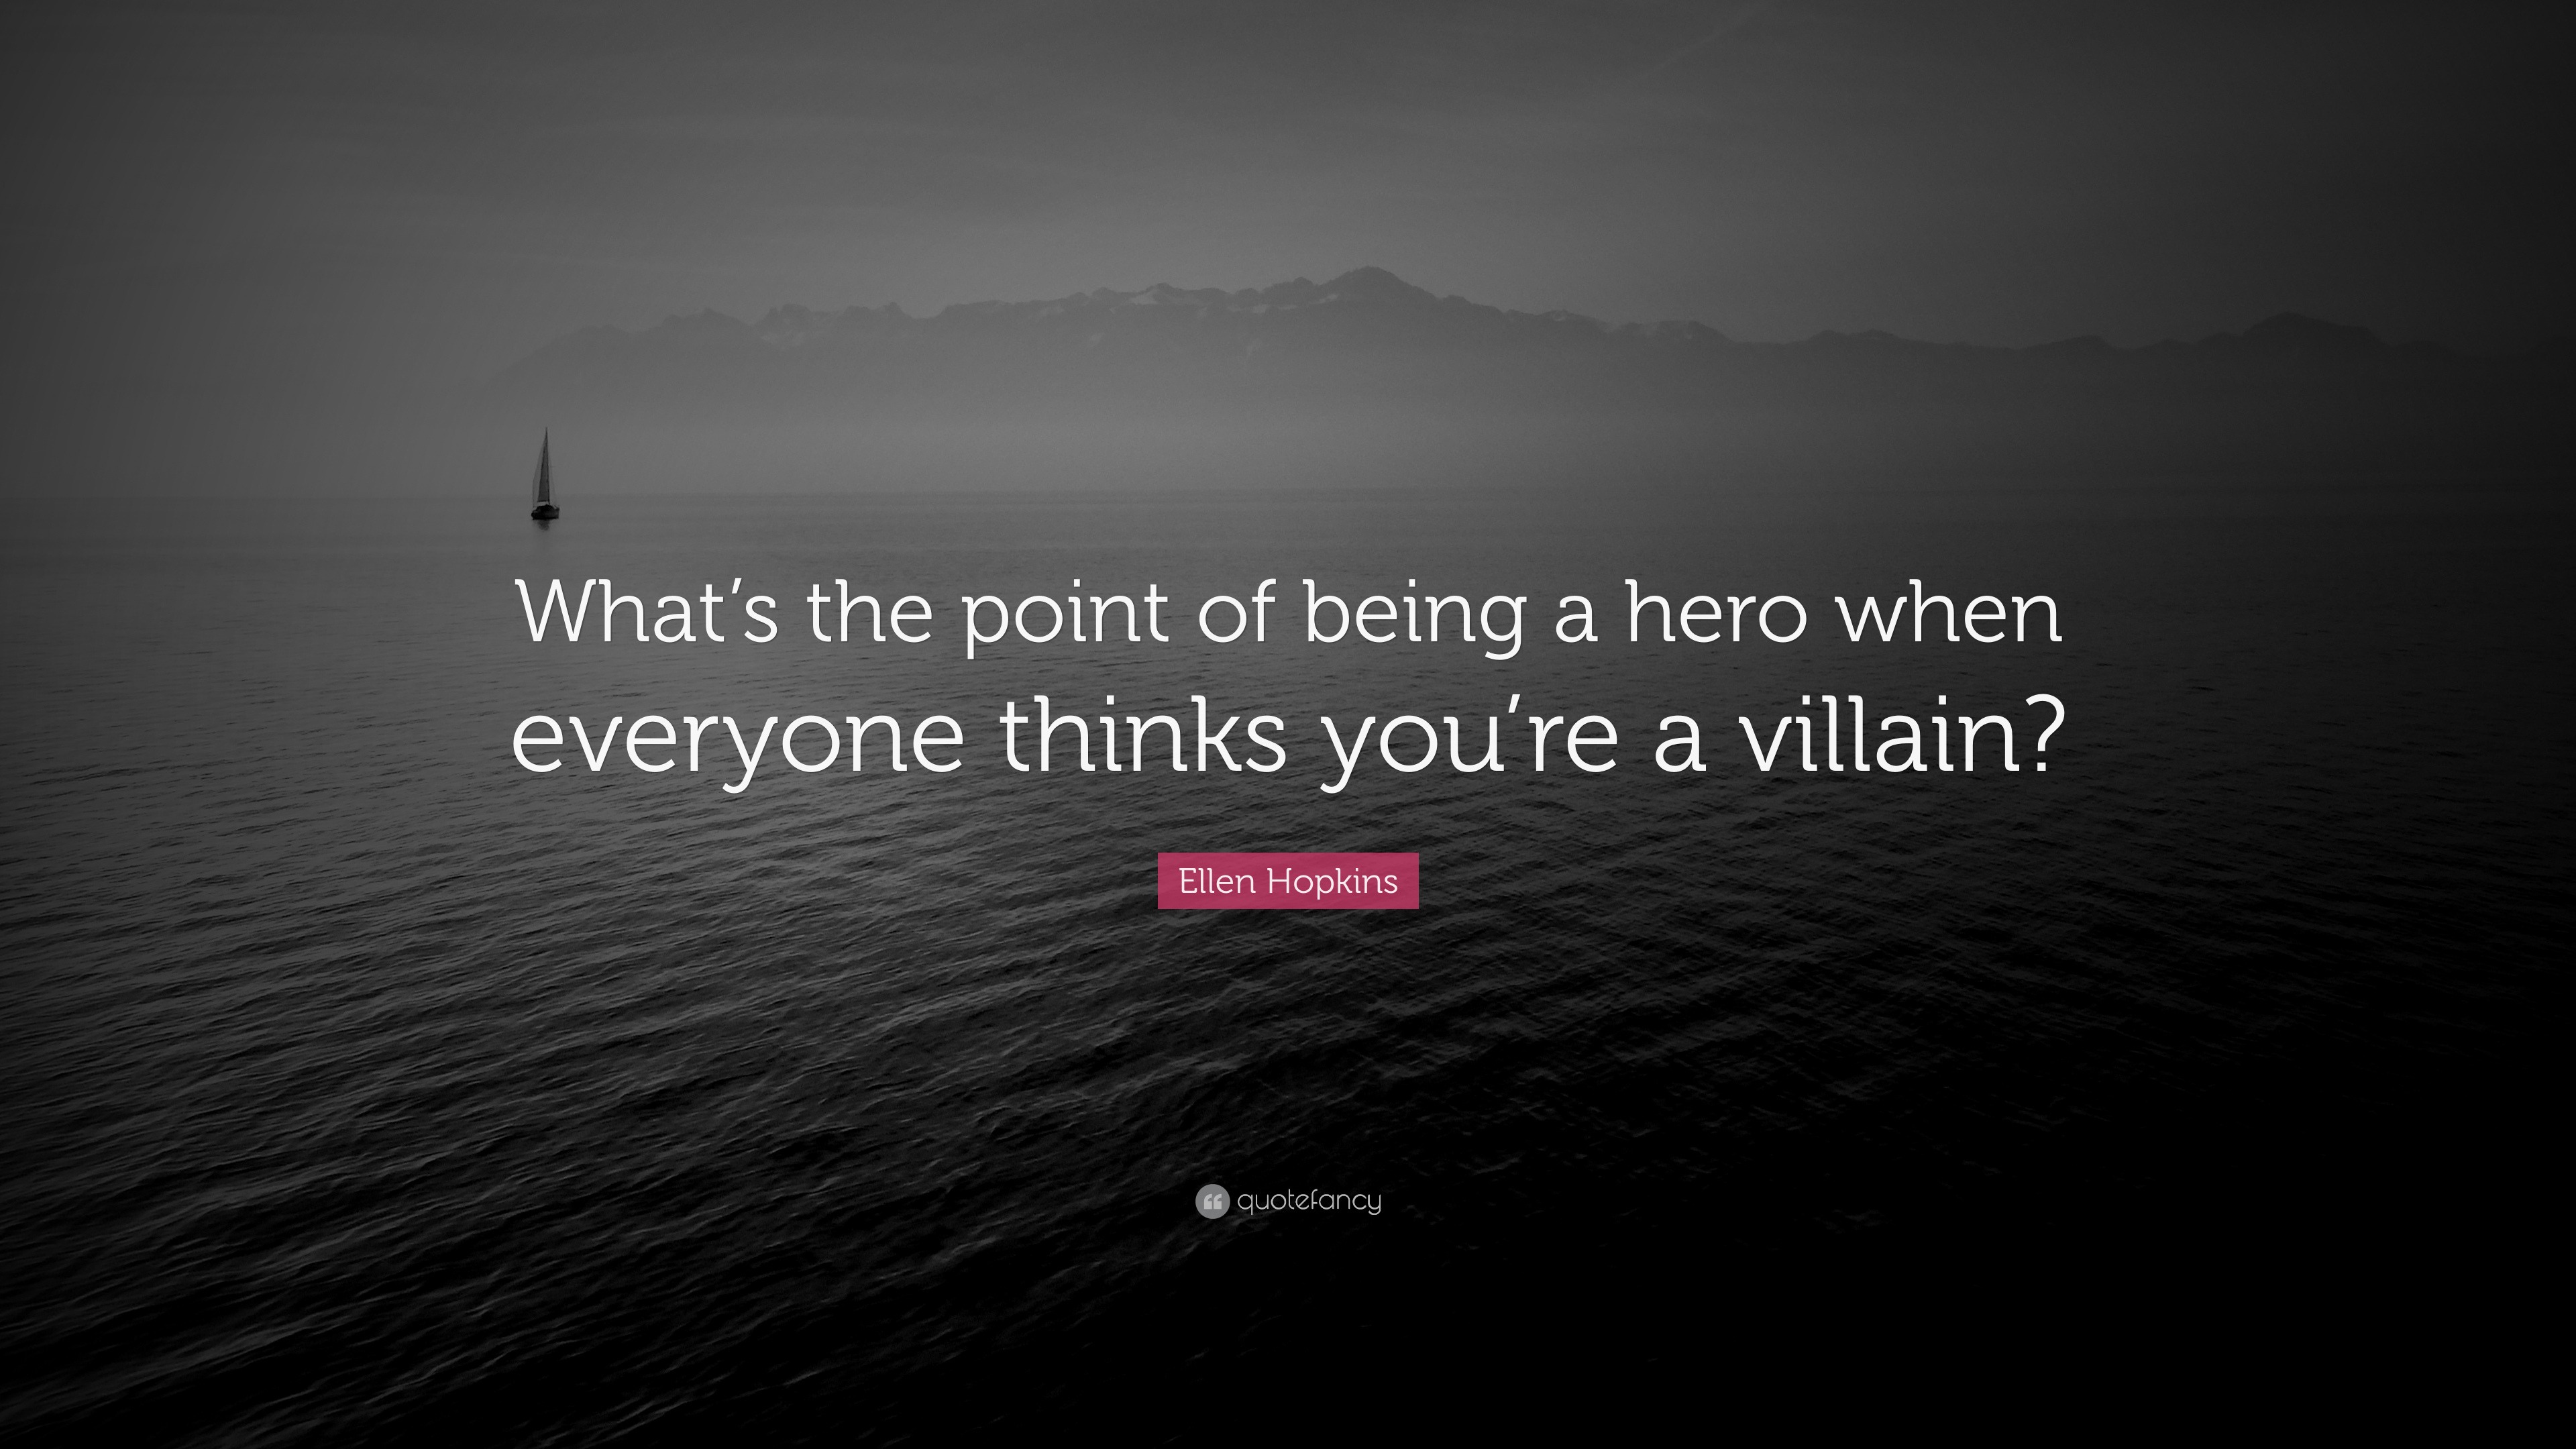 Ellen Hopkins Quote: “What's The Point Of Being A Hero When Everyone Thinks You're A